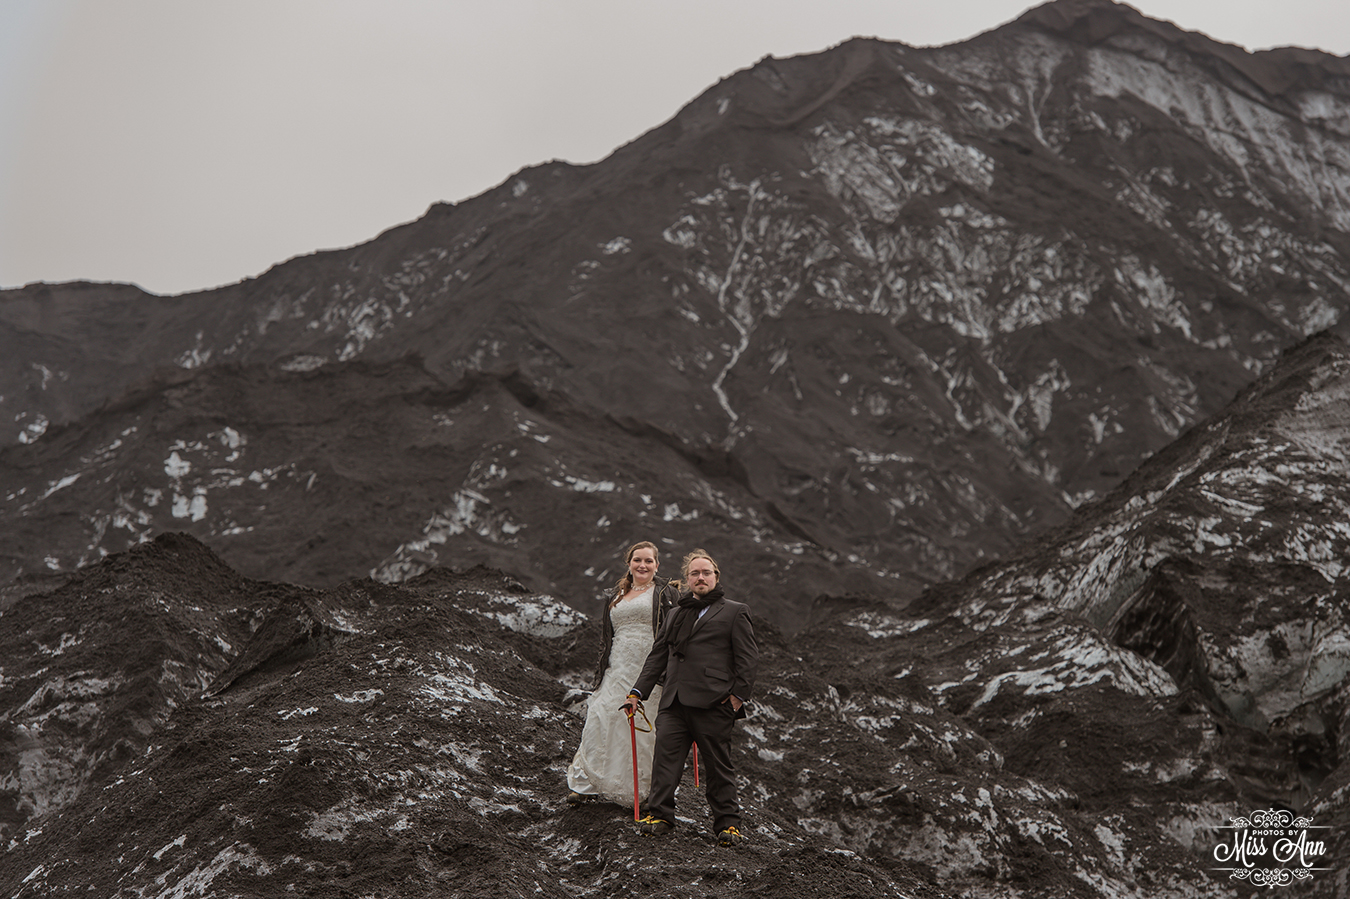 Iceland Elopement on a Glacier - Photos by Miss Ann